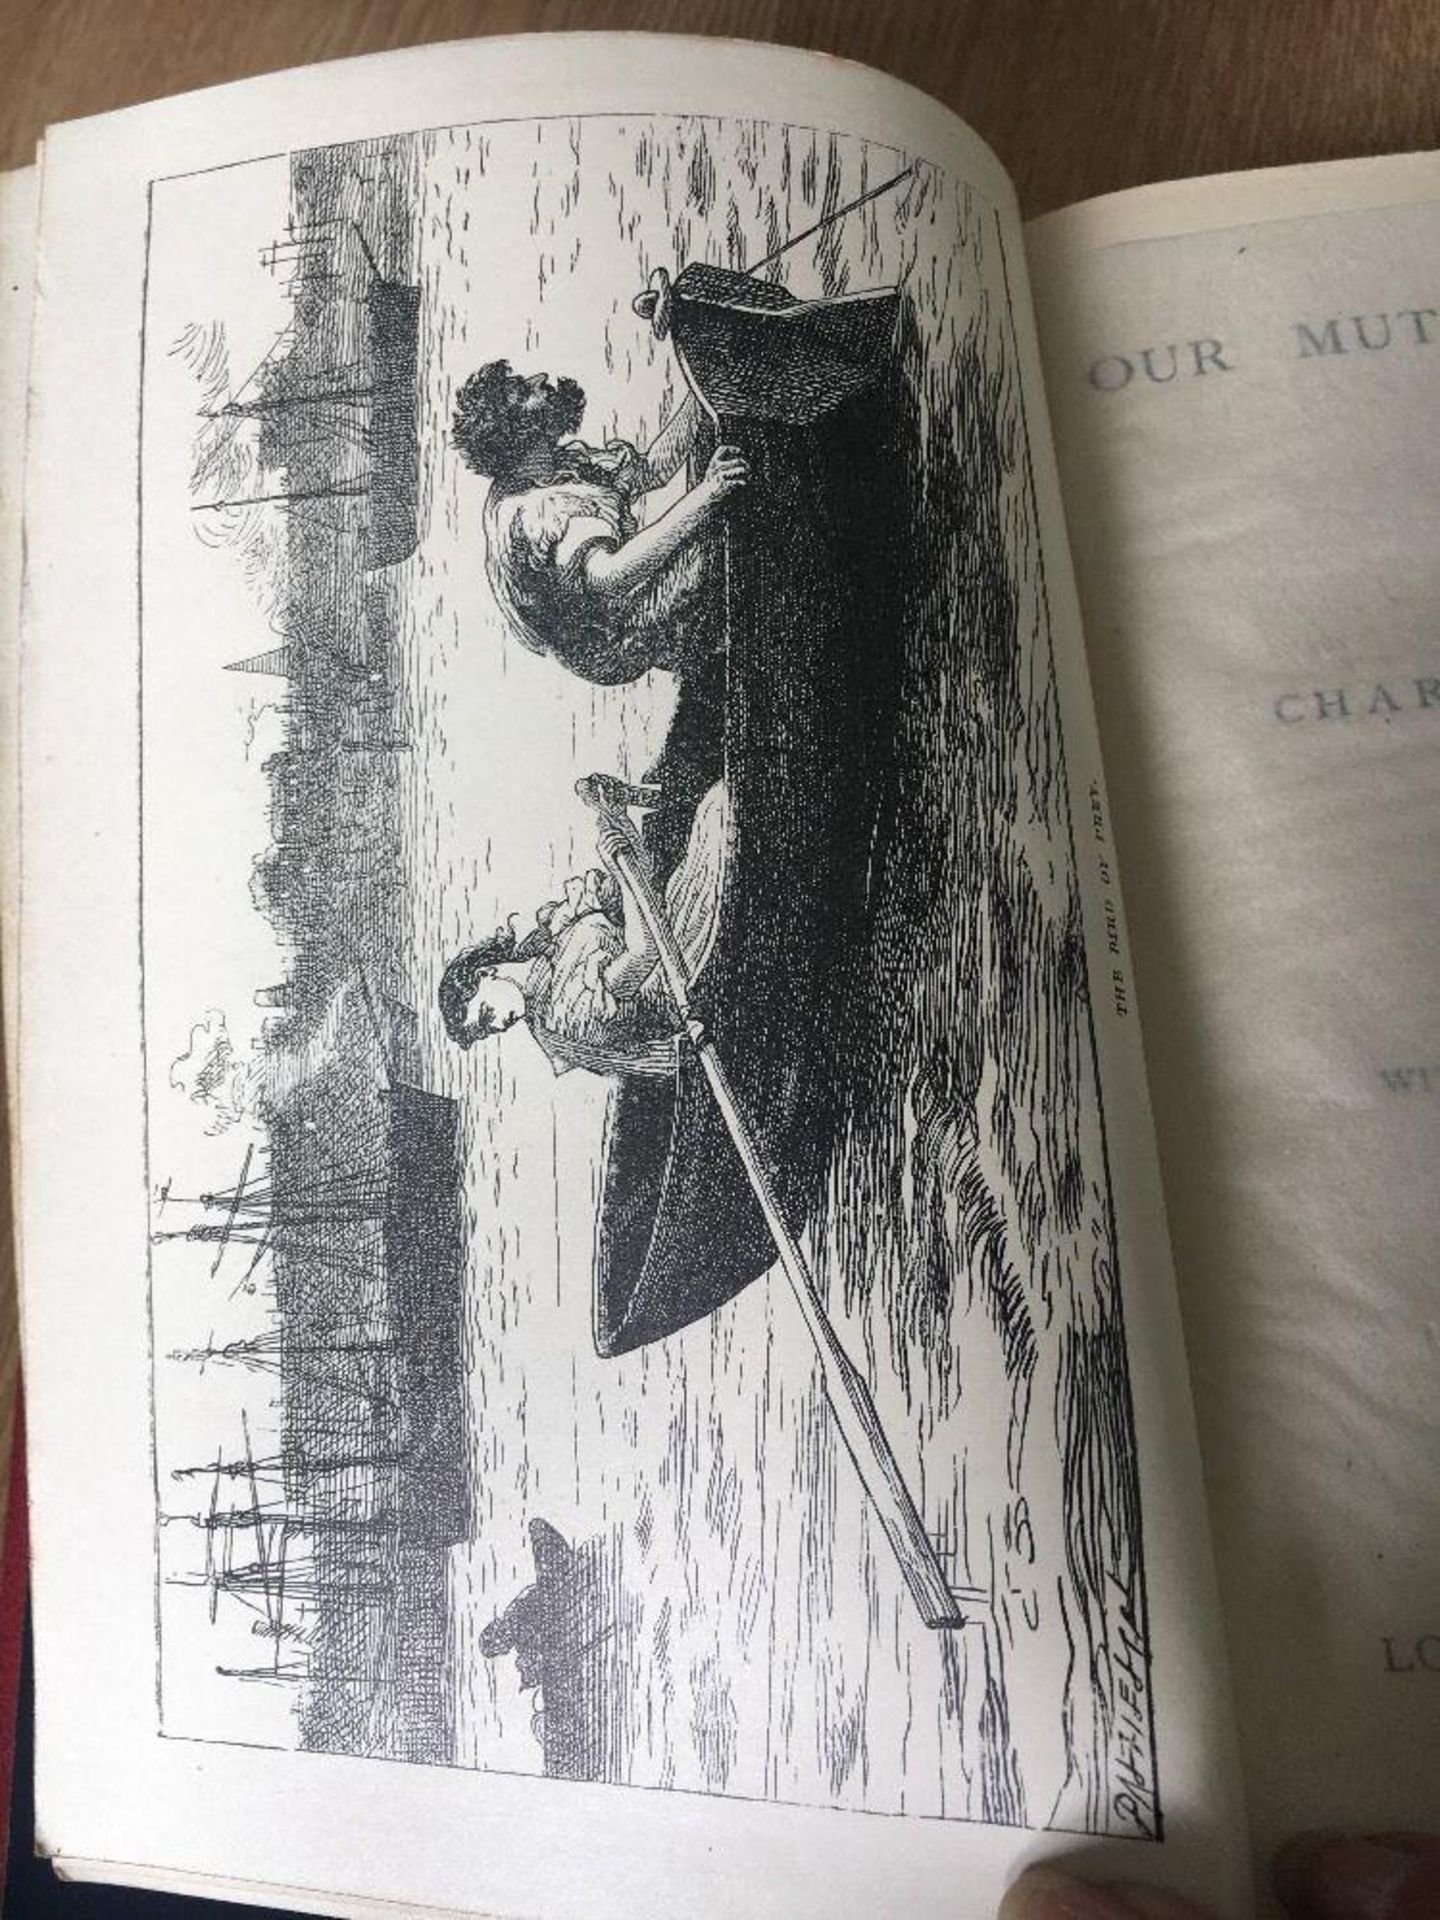 Antique - Charles Dickens - Our Mutual Friend - Chapman & Hall - 1892 - Image 2 of 3